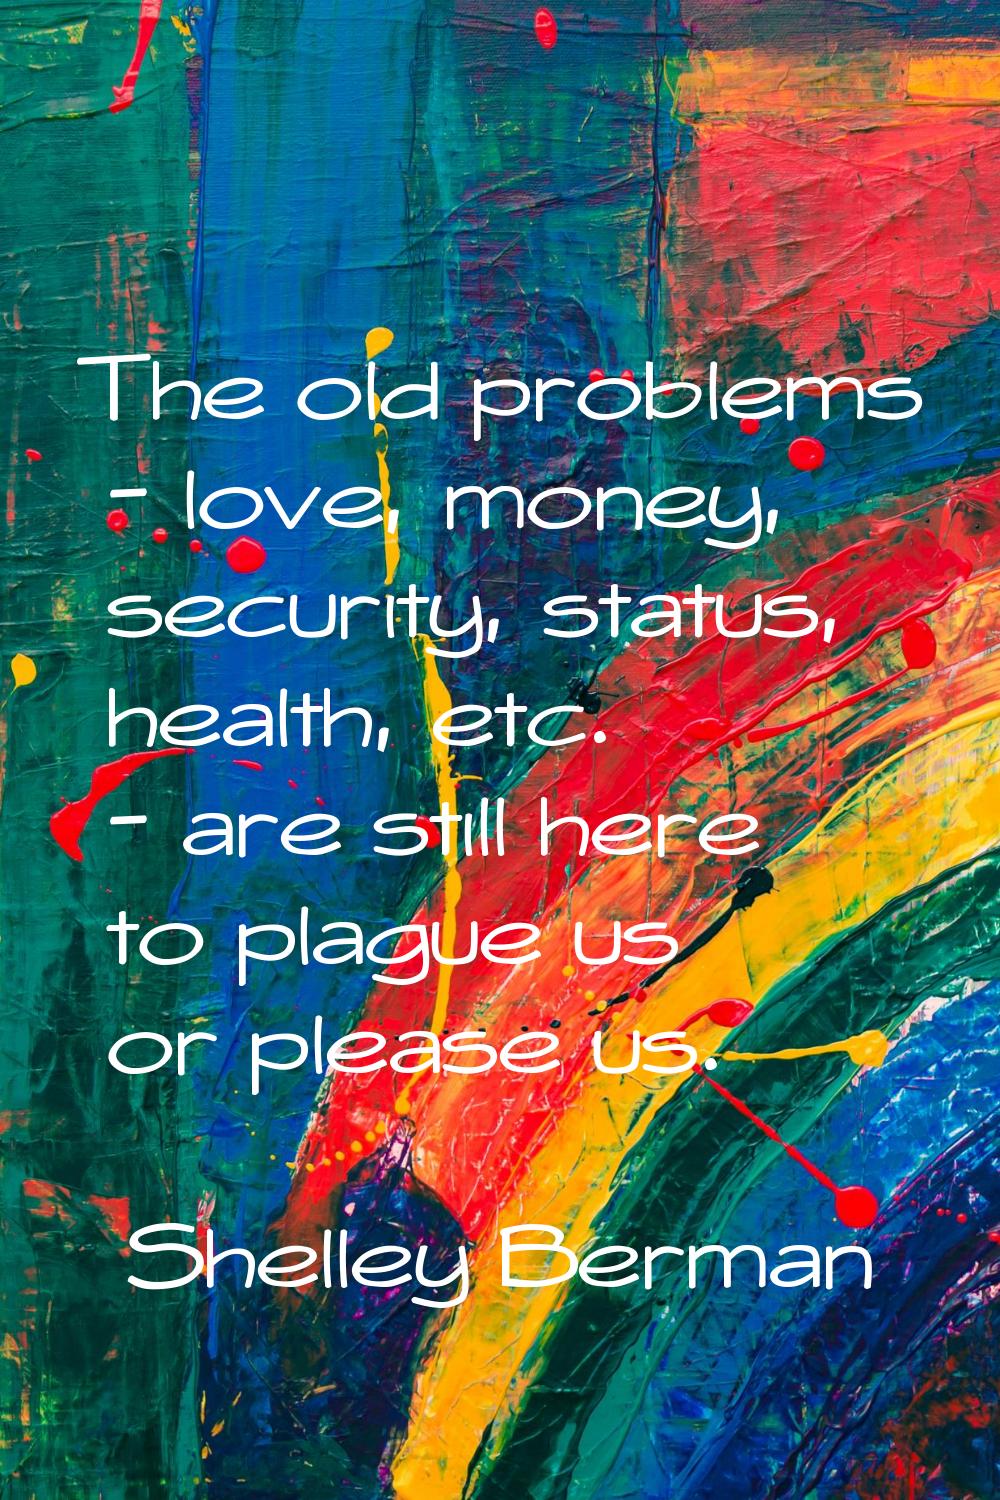 The old problems - love, money, security, status, health, etc. - are still here to plague us or ple